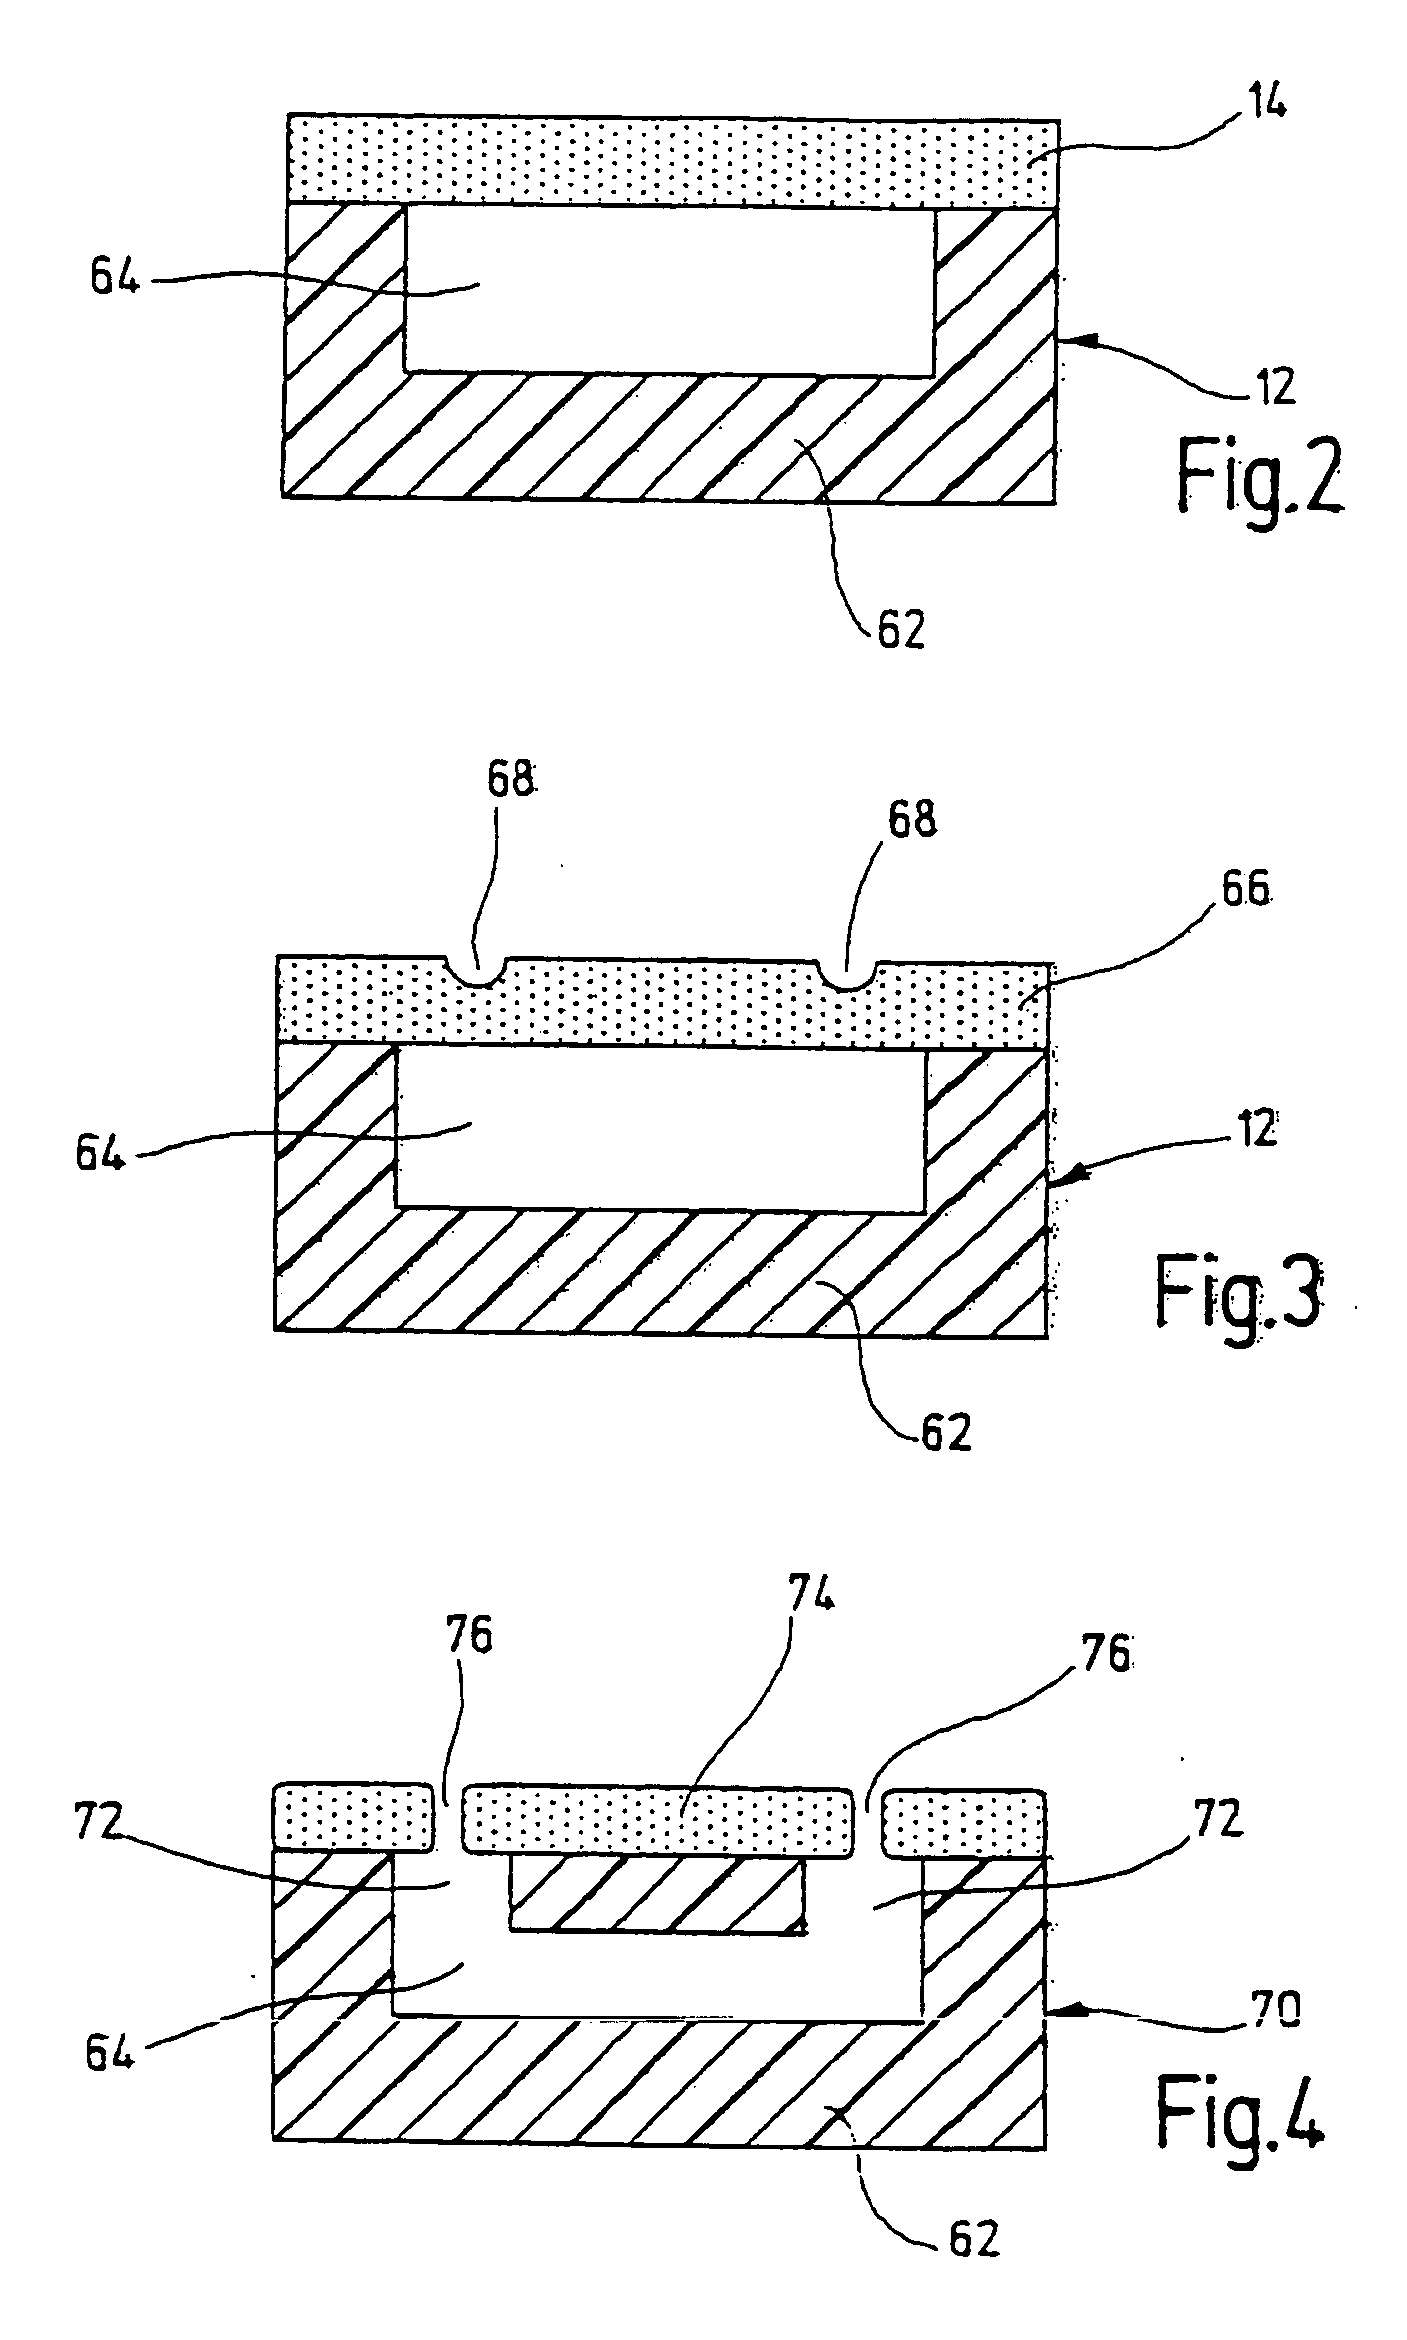 Method and device for contacting a microfluidic structure